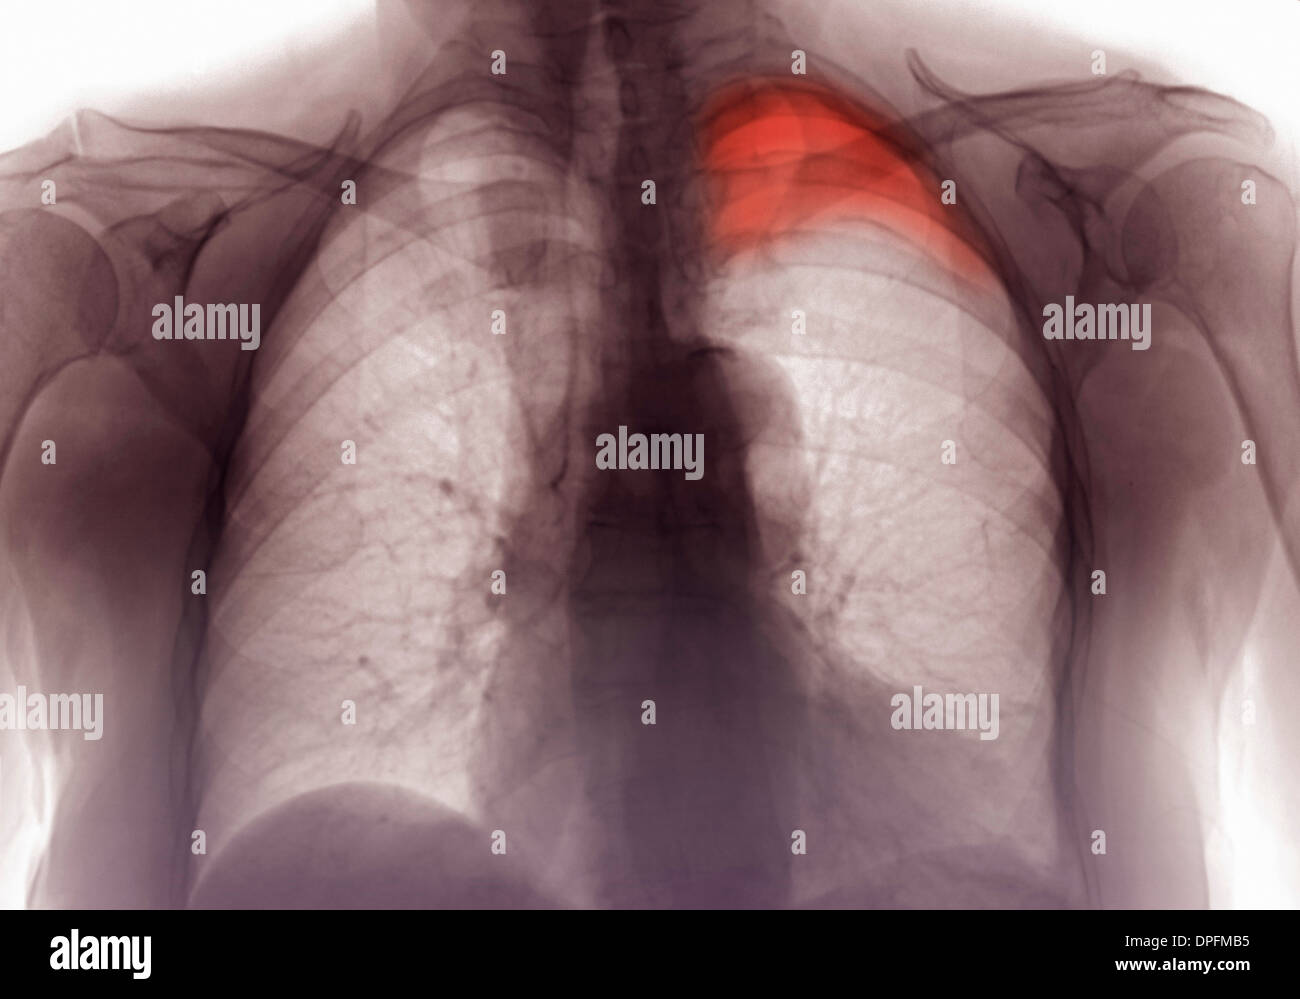 X-ray showing rib fracture and pneumothorax Stock Photo